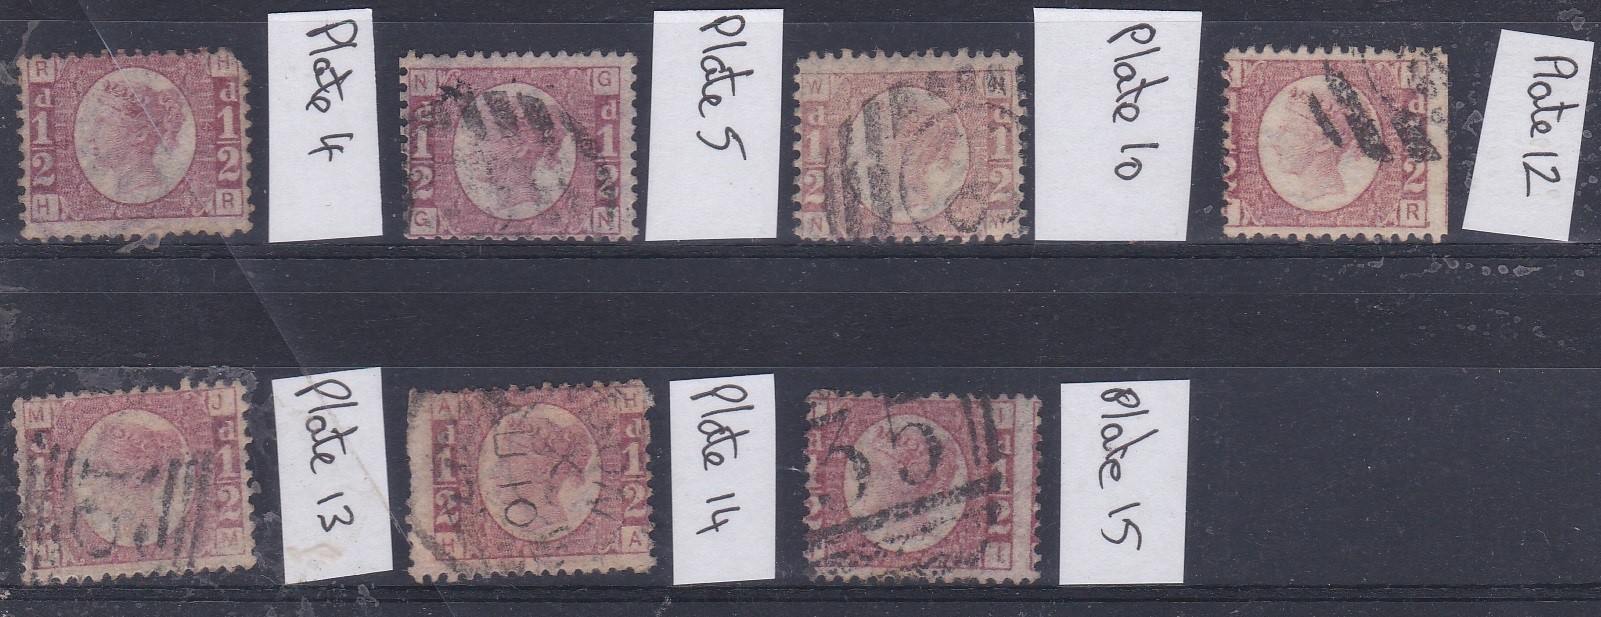 Great Britain 1870-Definitves SG49 used 1/2d with plate No.(7)-cat value £25 each